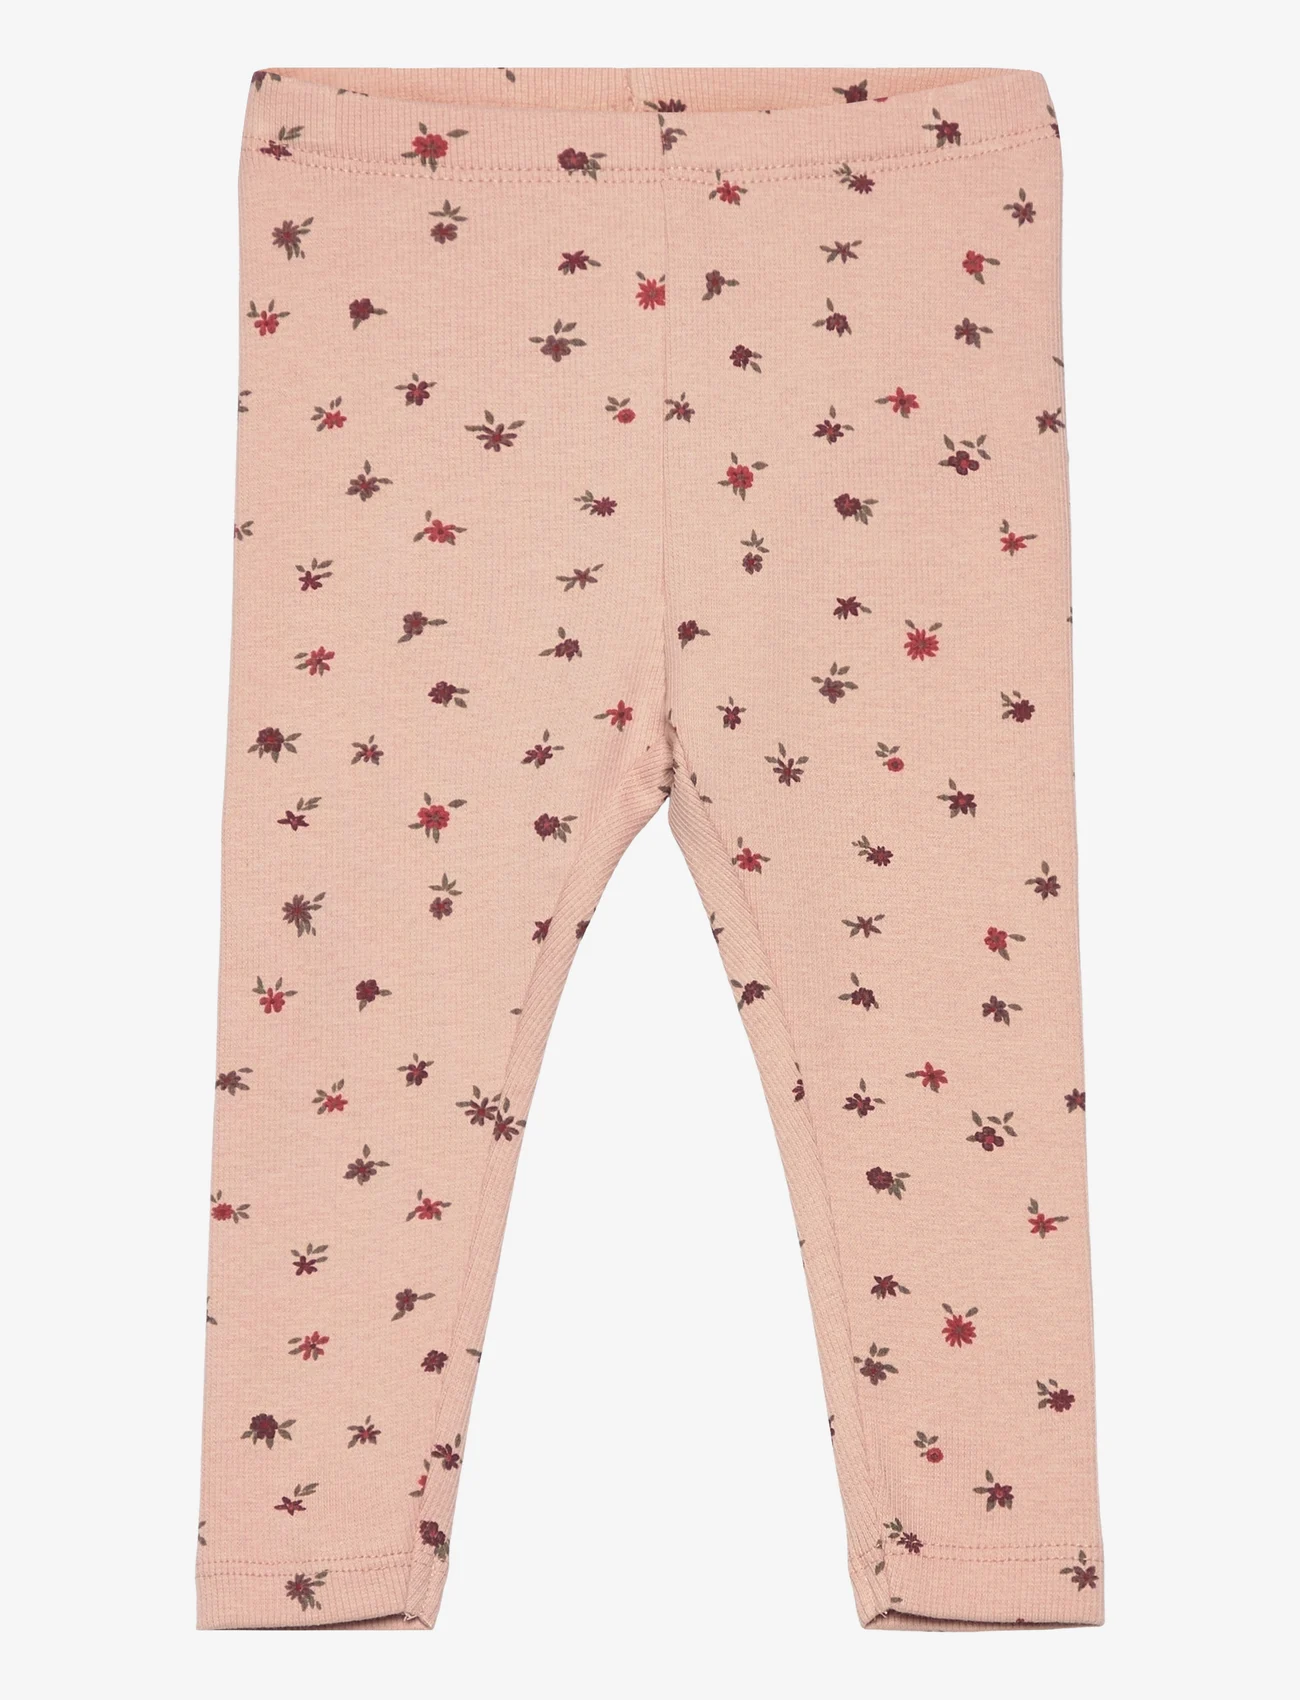 Wheat - Jersey Leggings Jules - lowest prices - pink sand flowers - 0